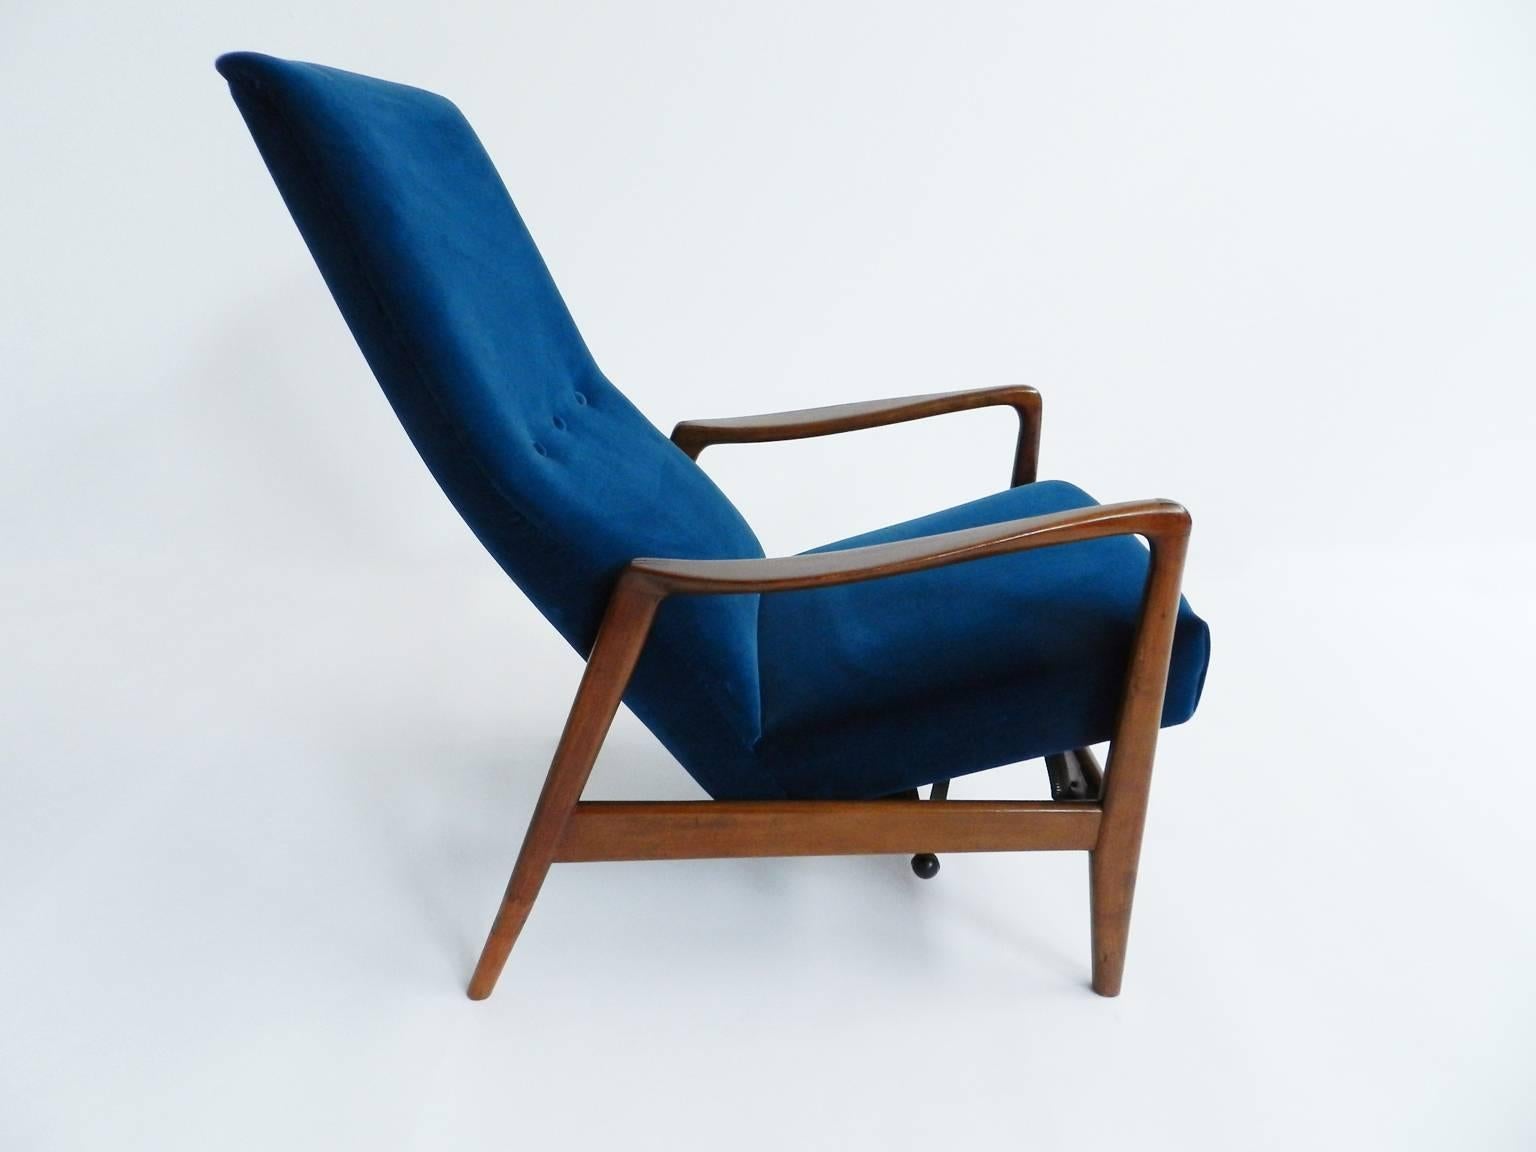 Beautiful adjustable lounge chair chosen by Gio Ponti for the hotel Parco Dei Principi in Sorrento.

Totally reupholstered in 